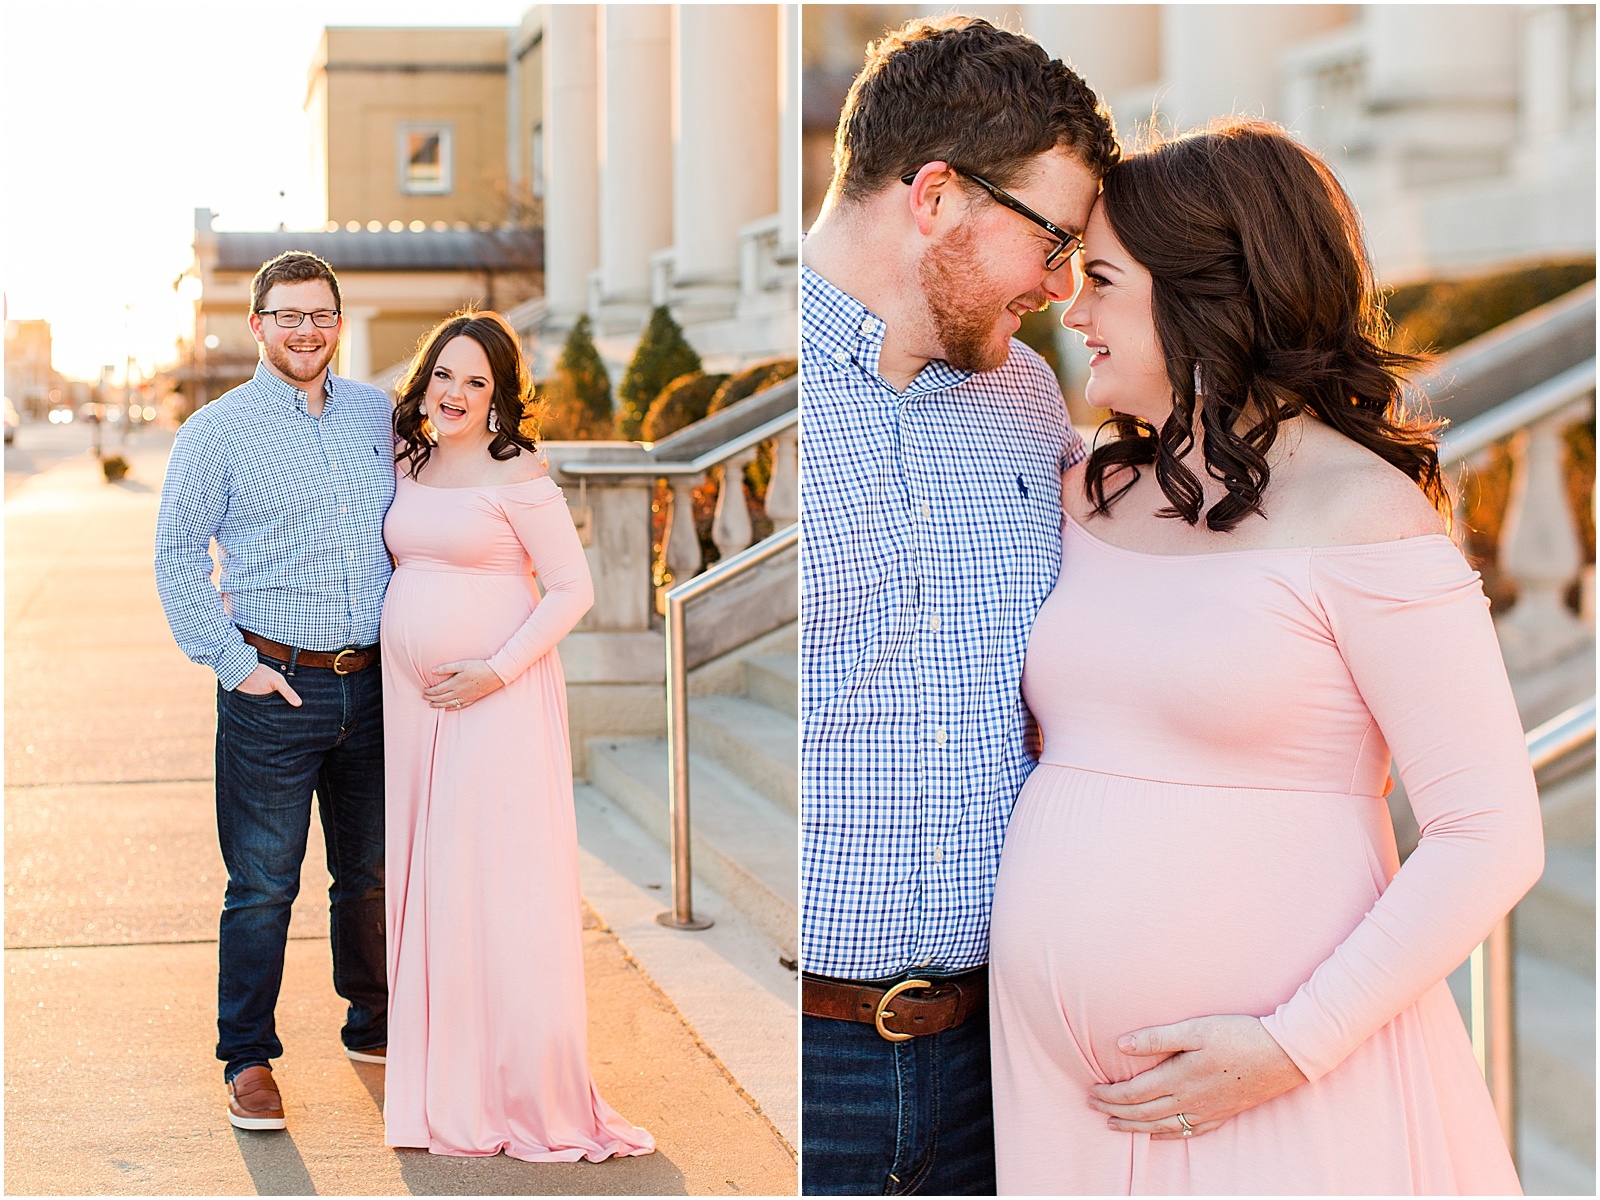 A Downtown Owensboro Maternity Session | Kayla and Grant Evansville Indiana Wedding Photographers-0002.jpg